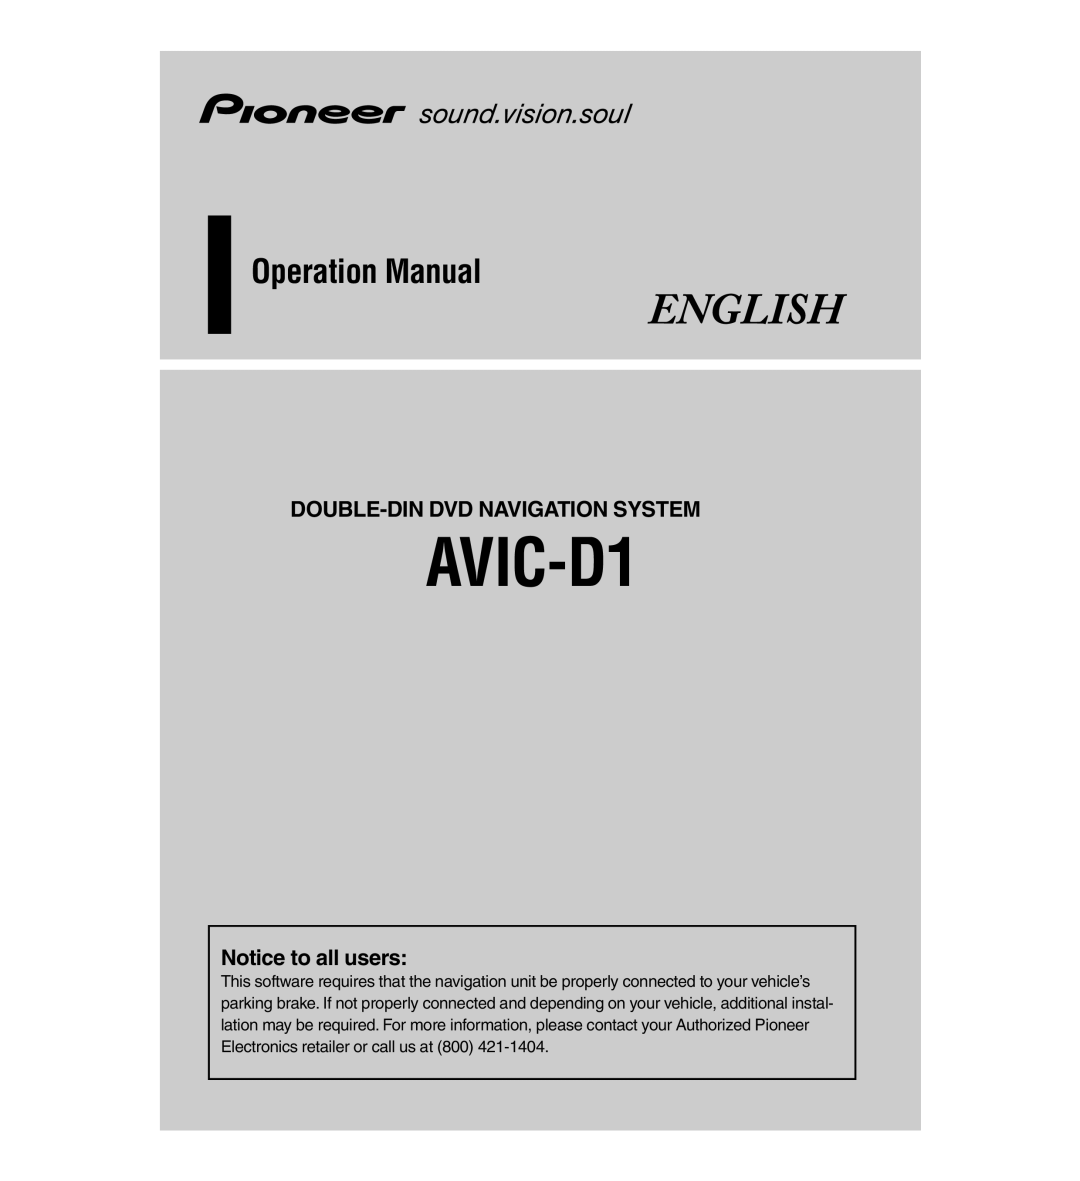 Pioneer AVIC-D1 operation manual English, Operation Manual, Double-Dindvd Navigation System, Notice to all users 